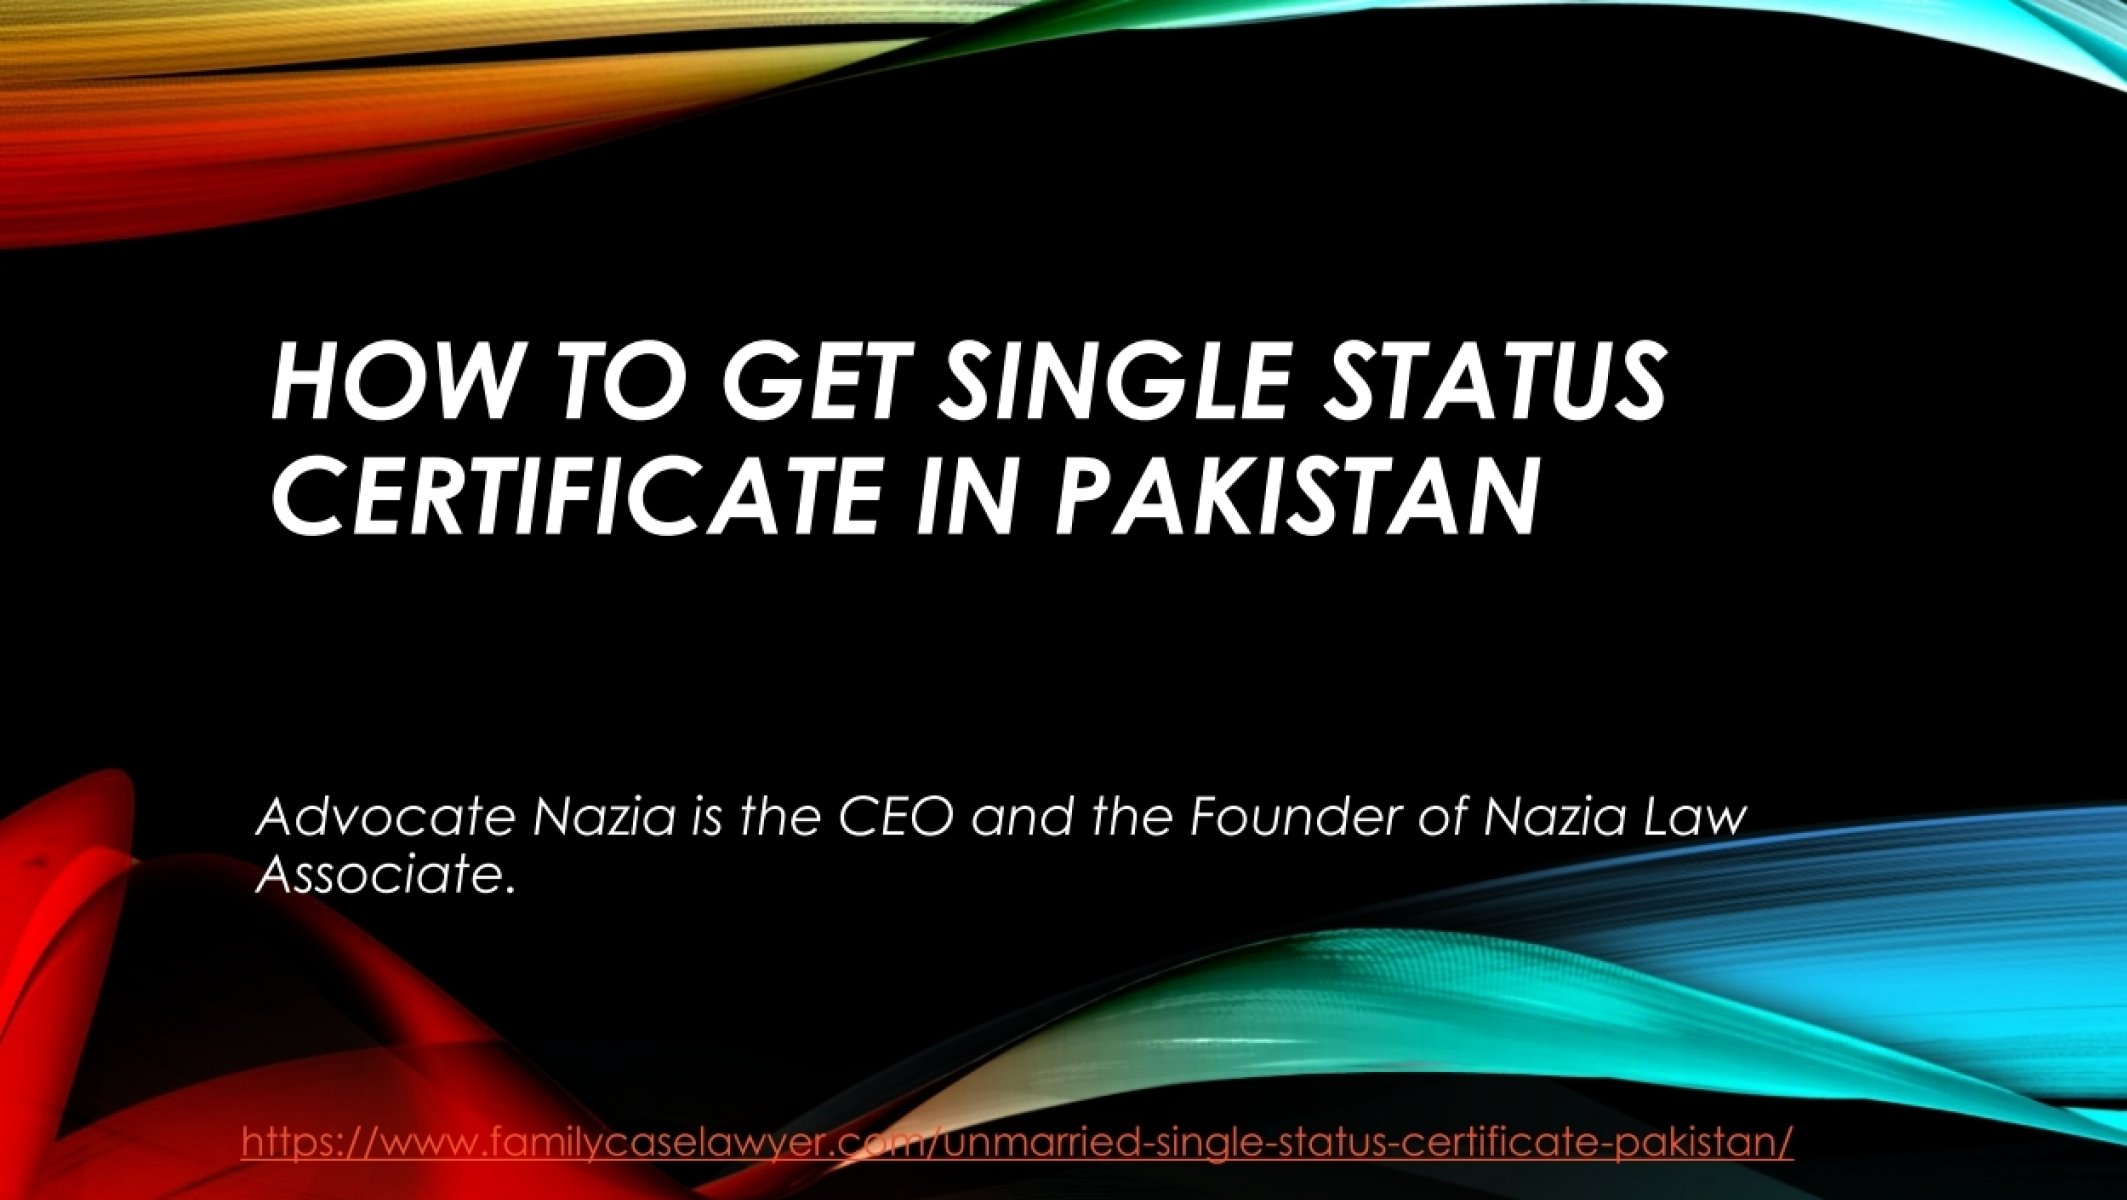 Let Guide The People On How To Get Single Status Certificate In Pakistan